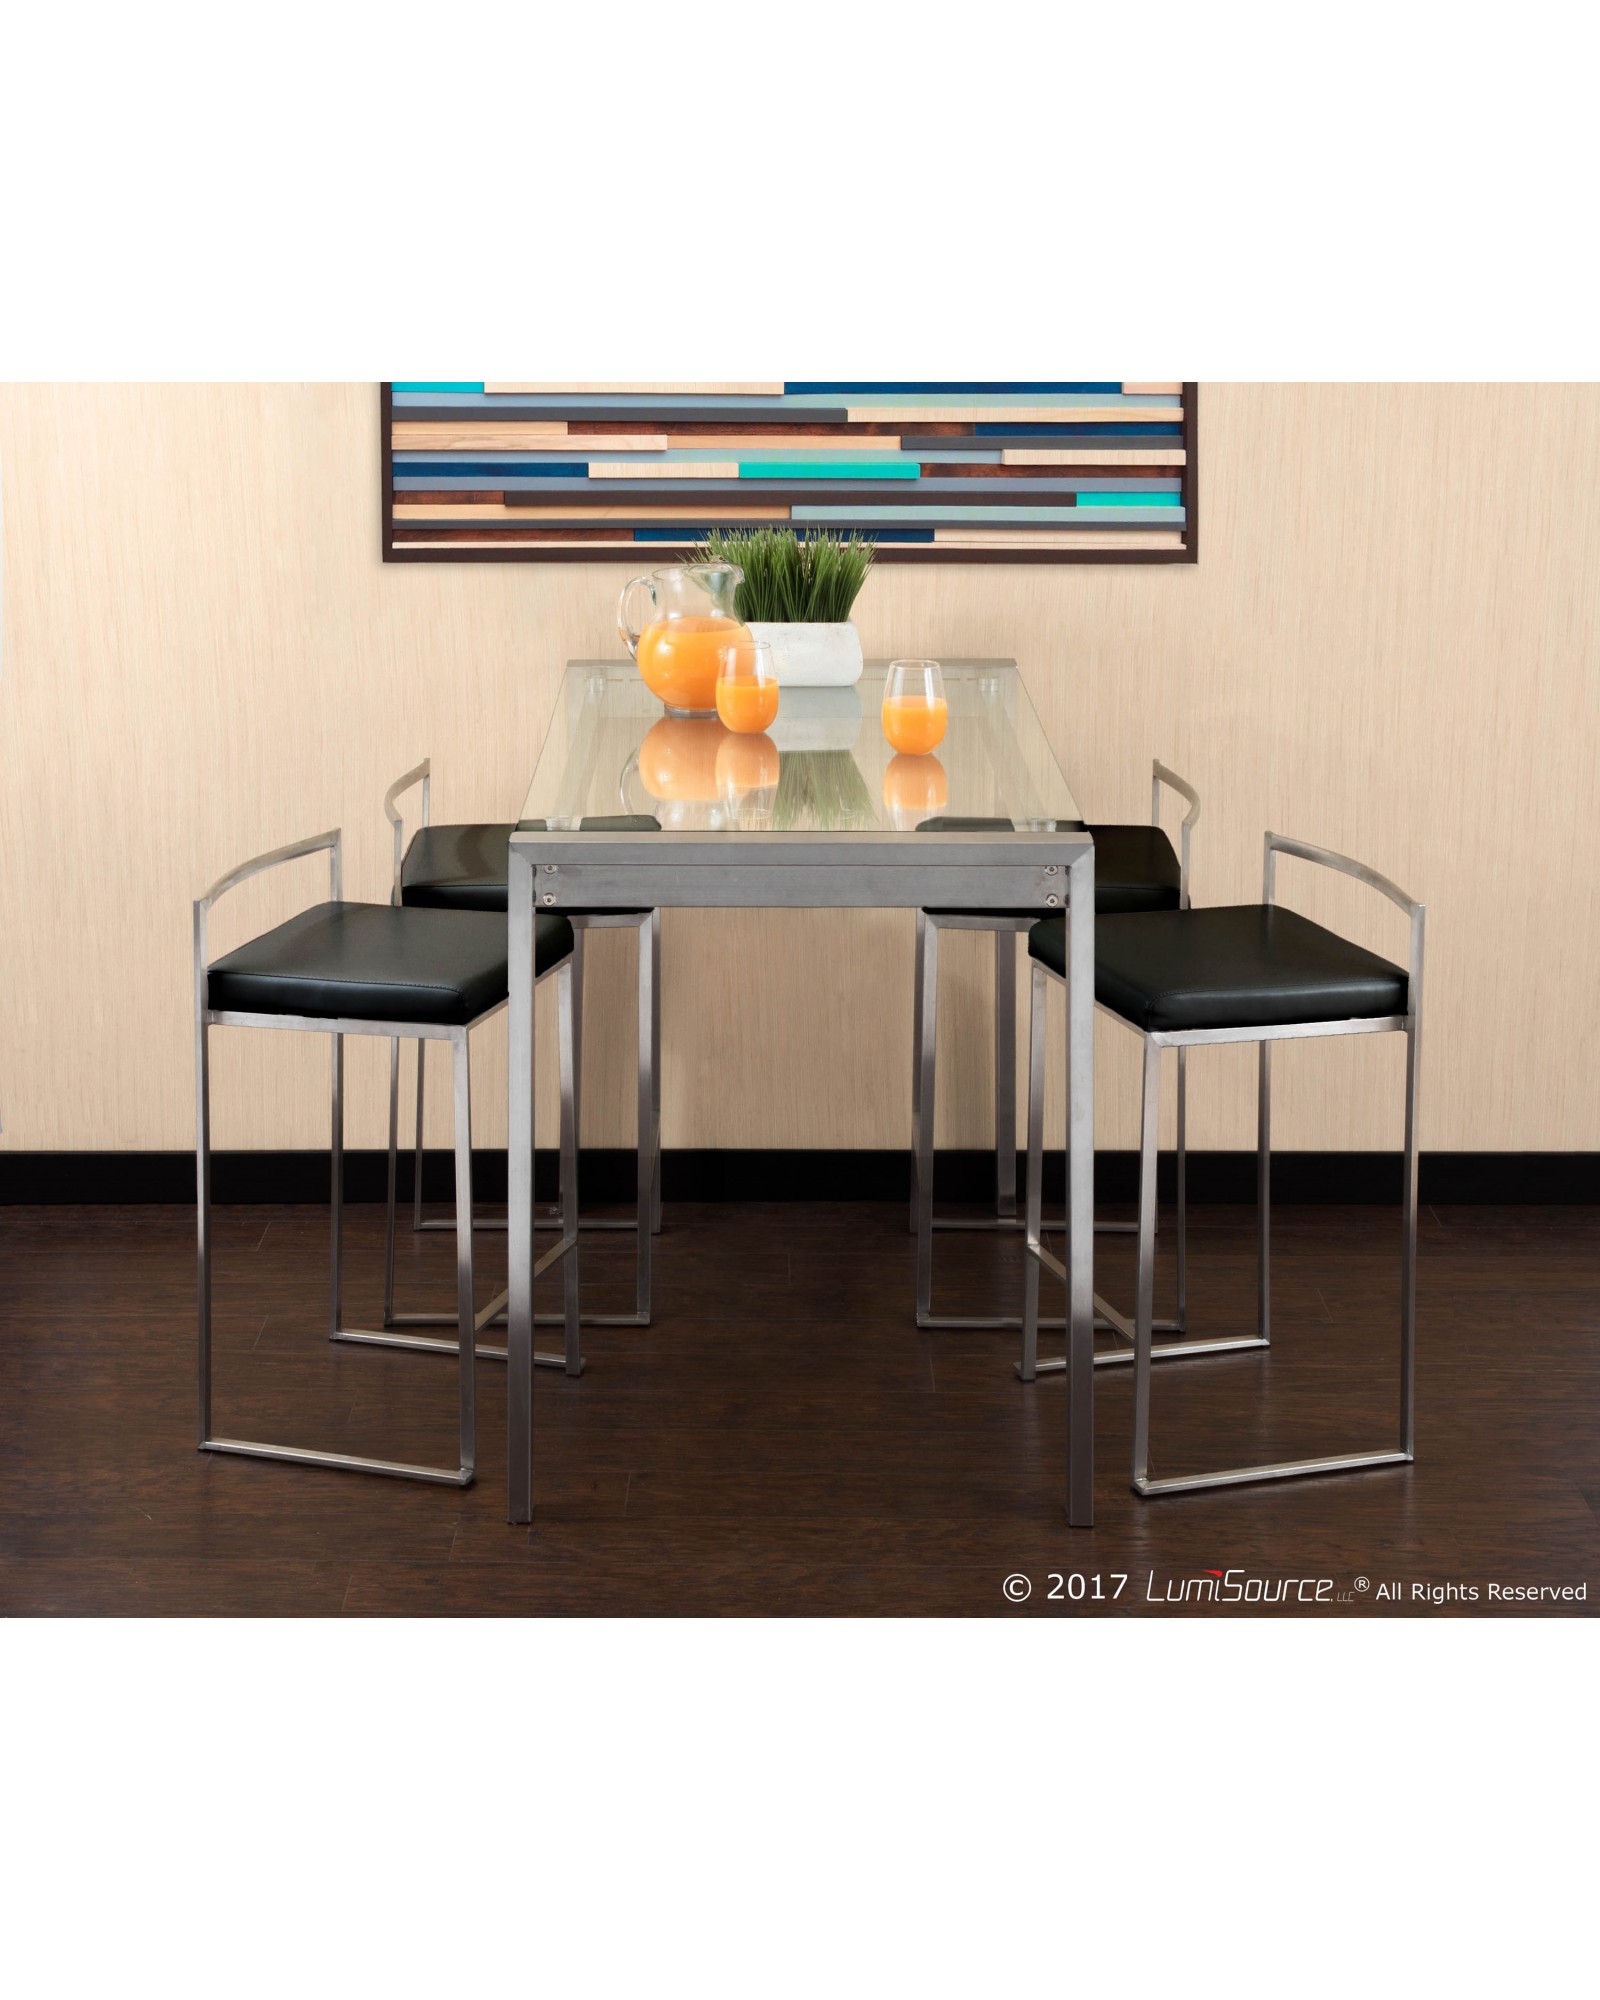 Fuji Contemporary Stackable Counter Stool in Black Faux Leather - Set of 2